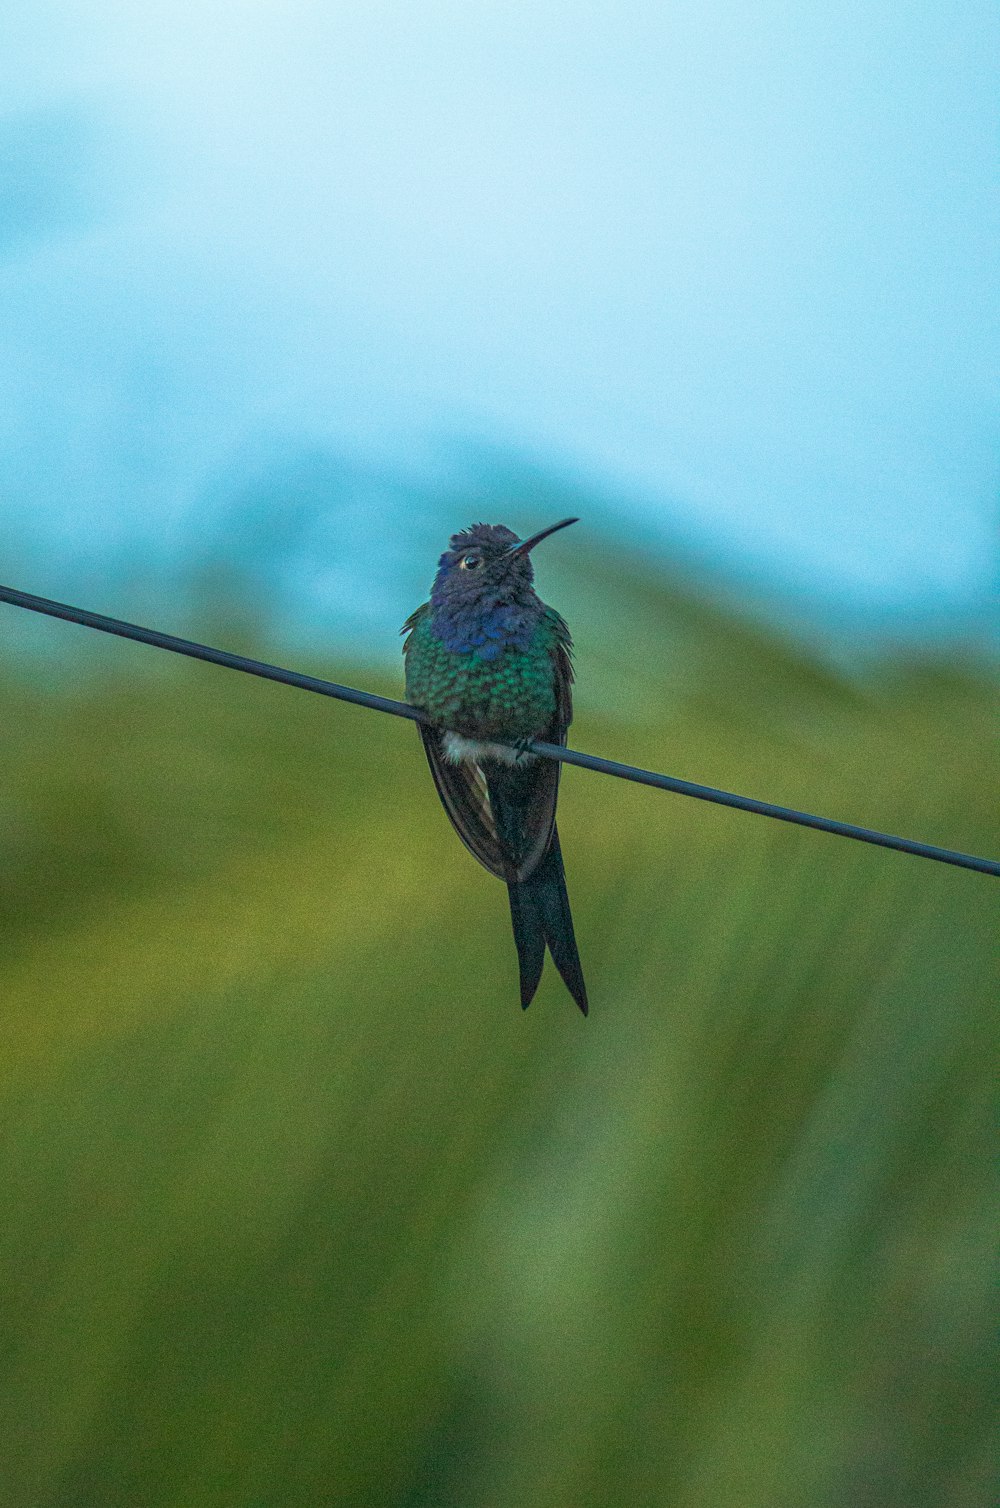 a hummingbird sitting on a wire with a blurry background